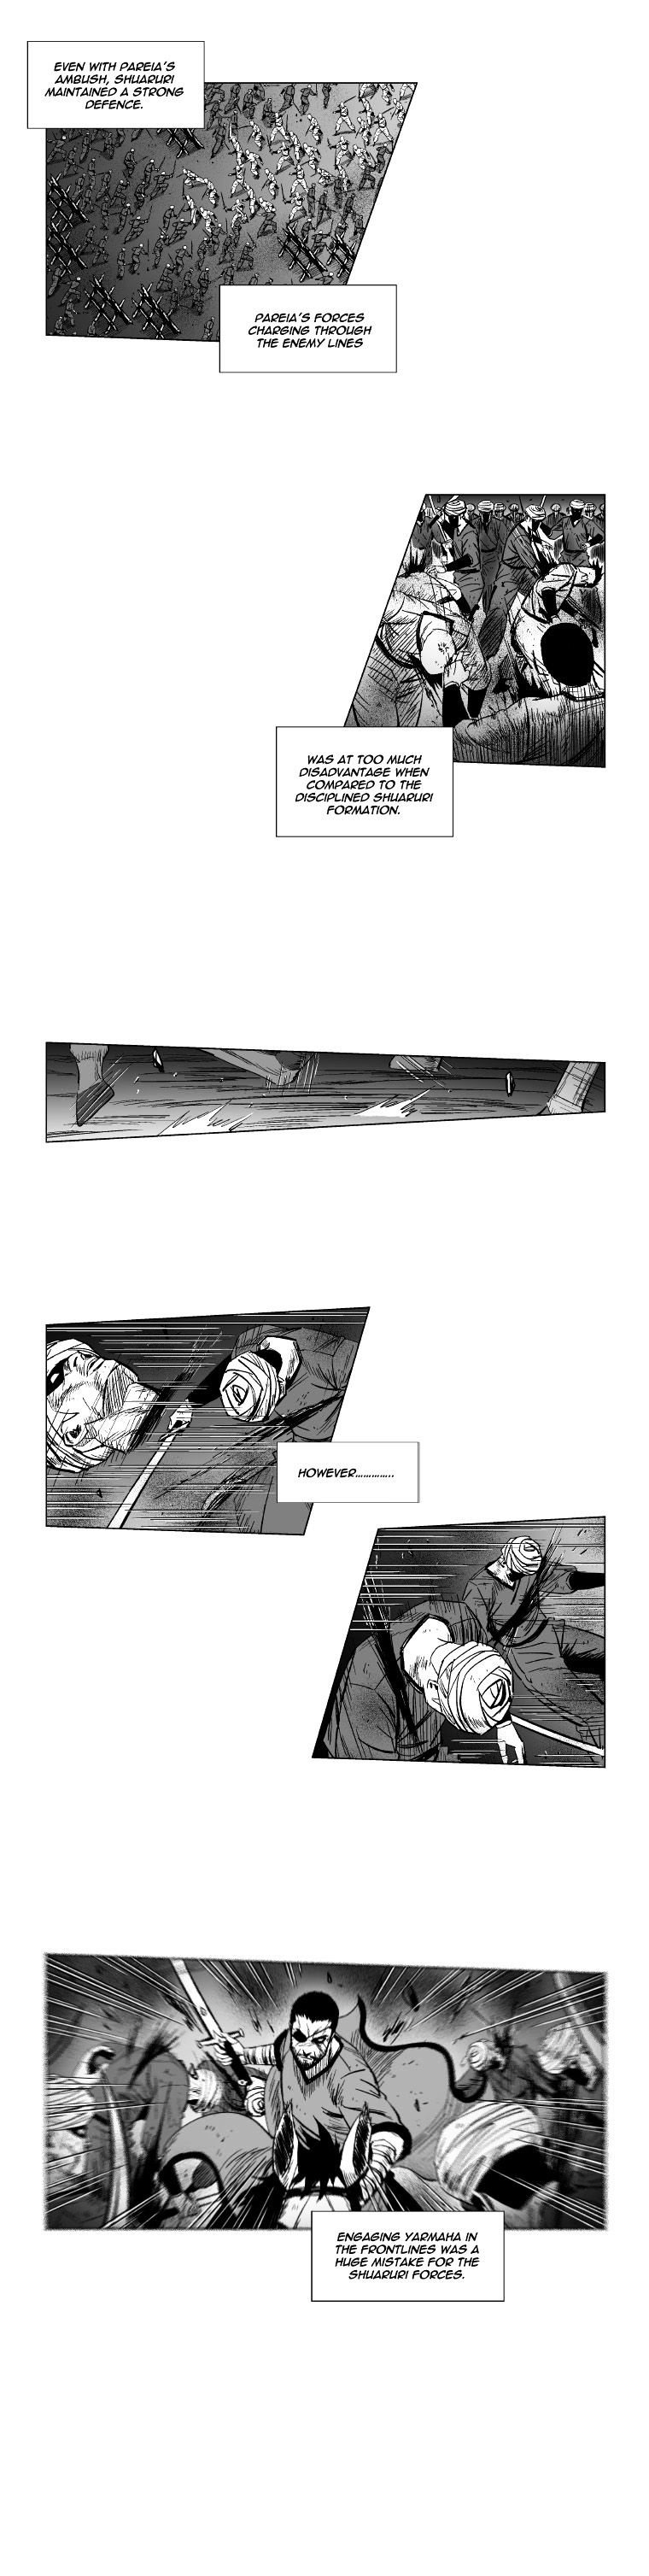 Red Storm - Page 2